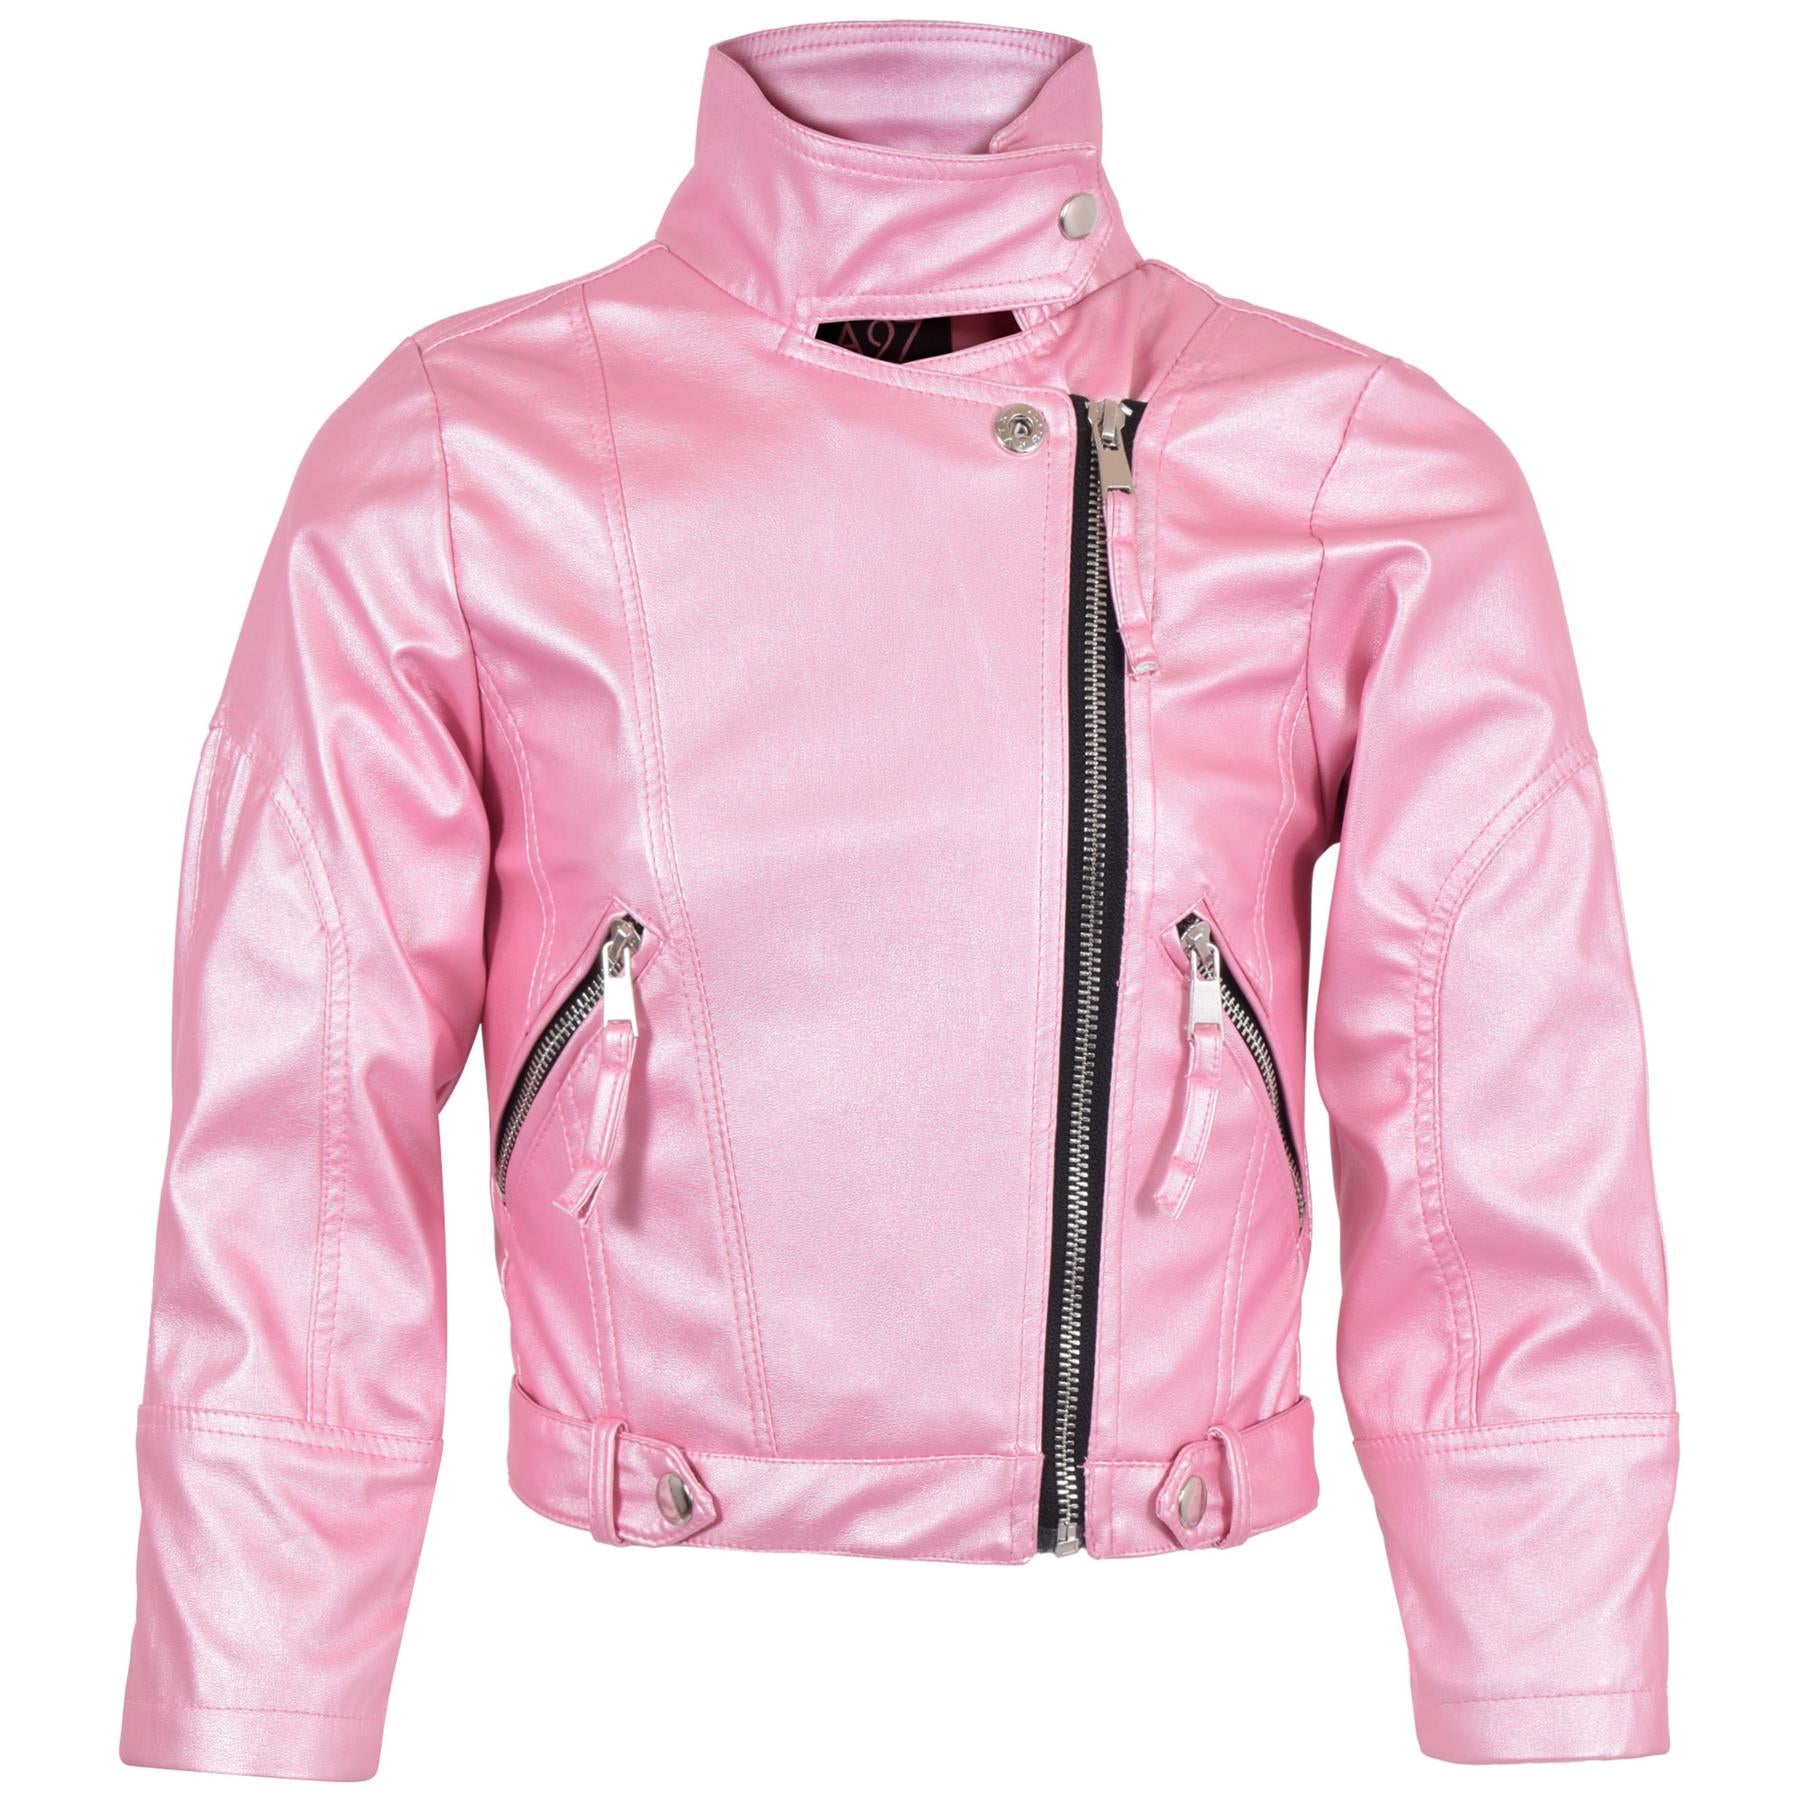 PU Leather Jacket Waterproof Baby Pink Coat For Girls